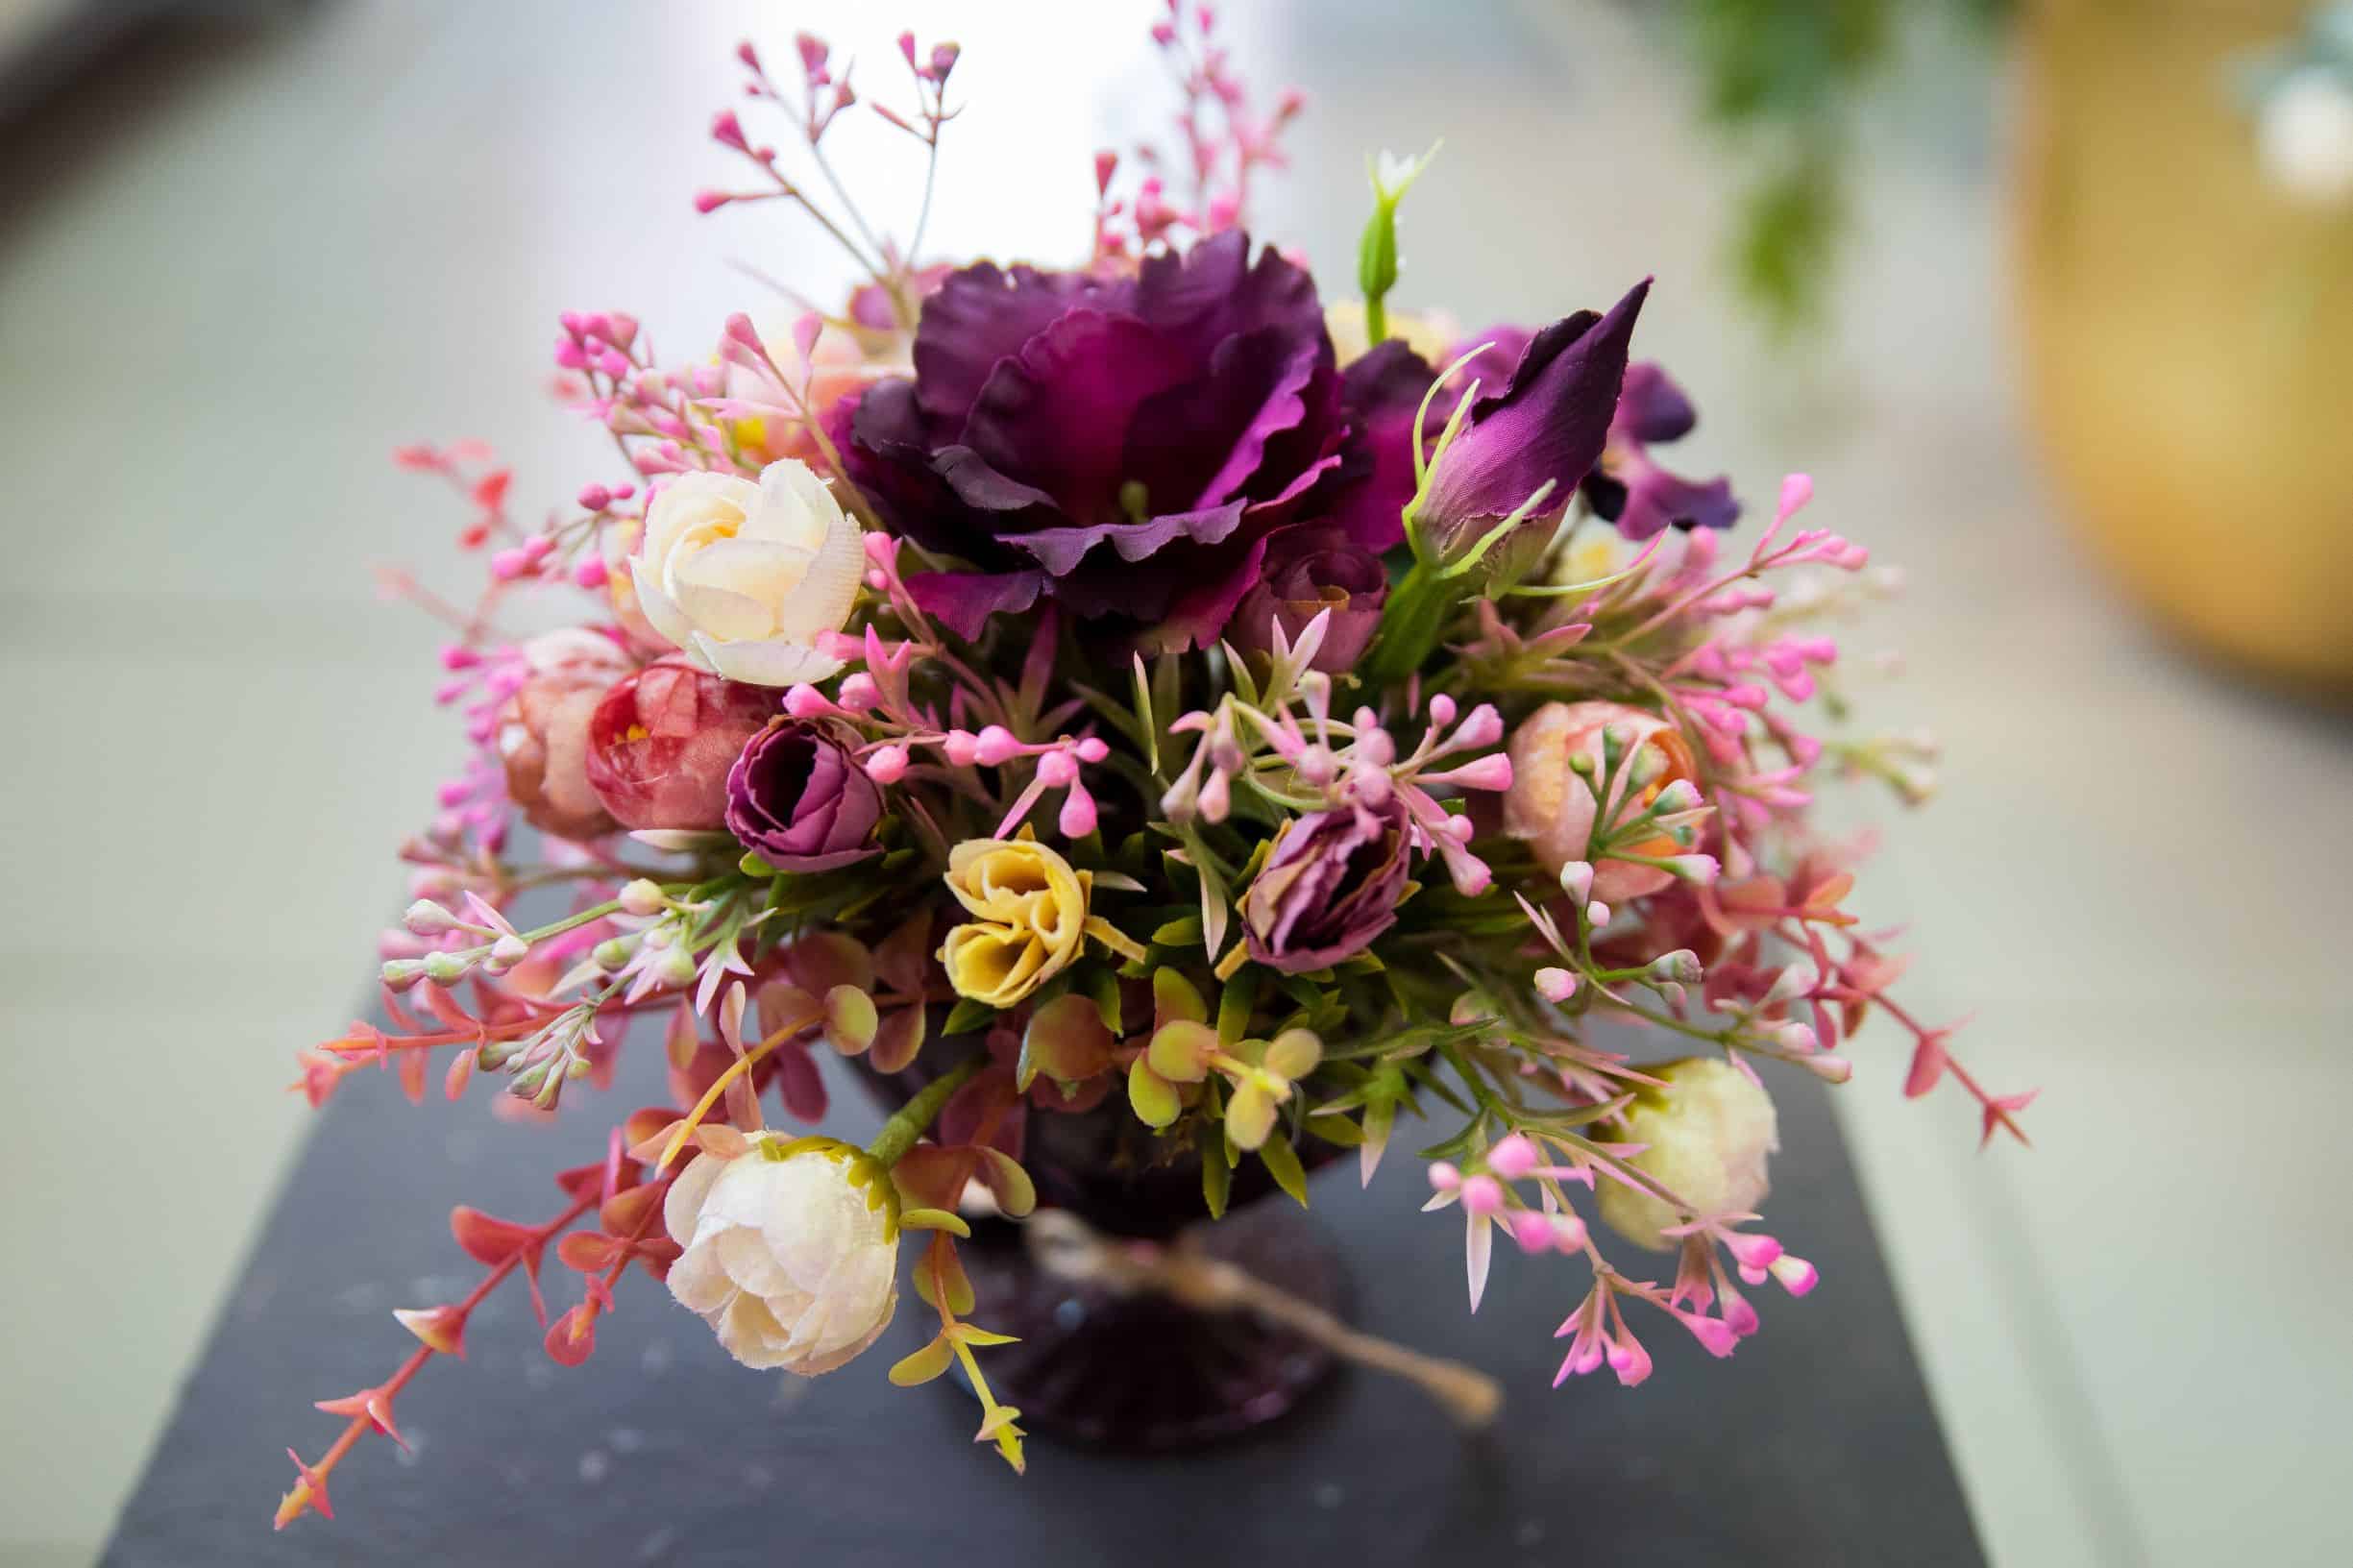 Georgeous flower Arrangement in Pink and Purple